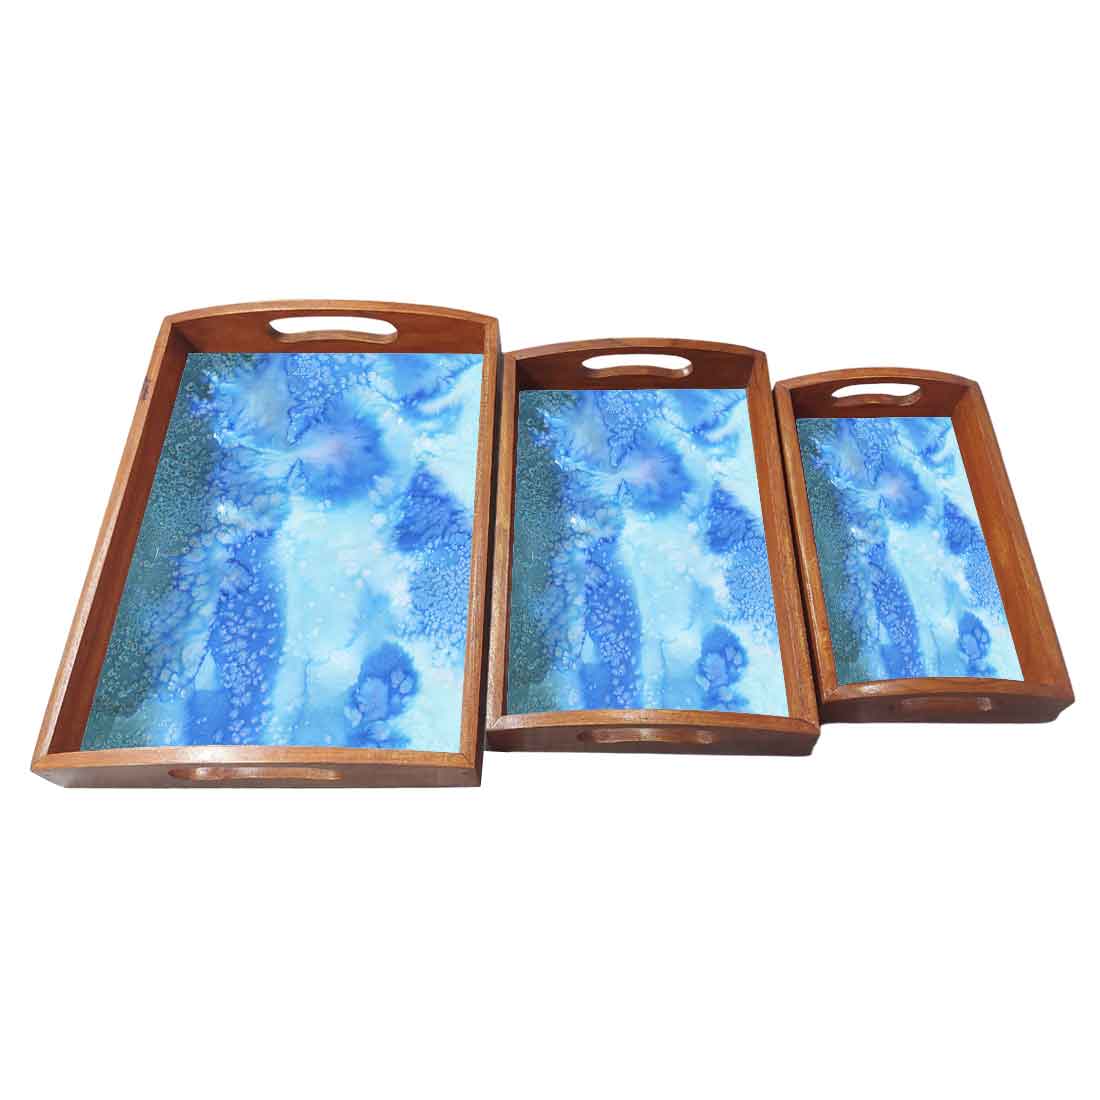 Wooden Rectangular Tray with Handles Set of 3 for Tea Coffee Serving